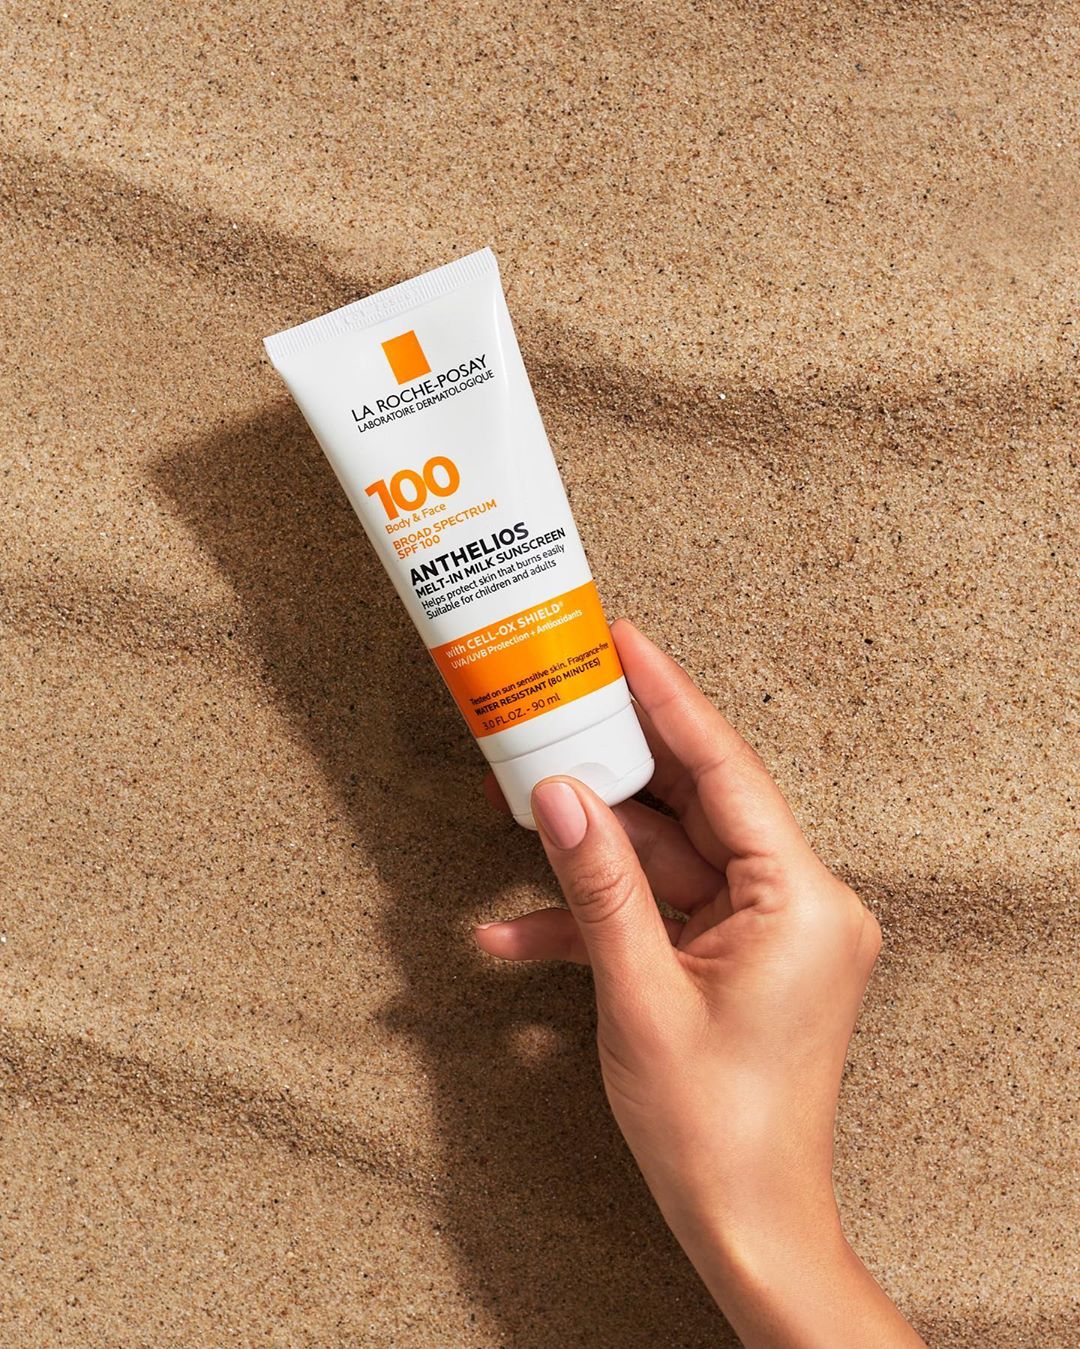 La Roche-Posay USA - Enjoying the outdoors this weekend? ⁣⁣
#PlaySafeInTheSun and make sure to reapply #sunscreen every 2 hours. ⁣☀️🌤 ⁣
⁣
Featured here our #Anthelios Melt-In Milk SPF 100, oxybenzone,...